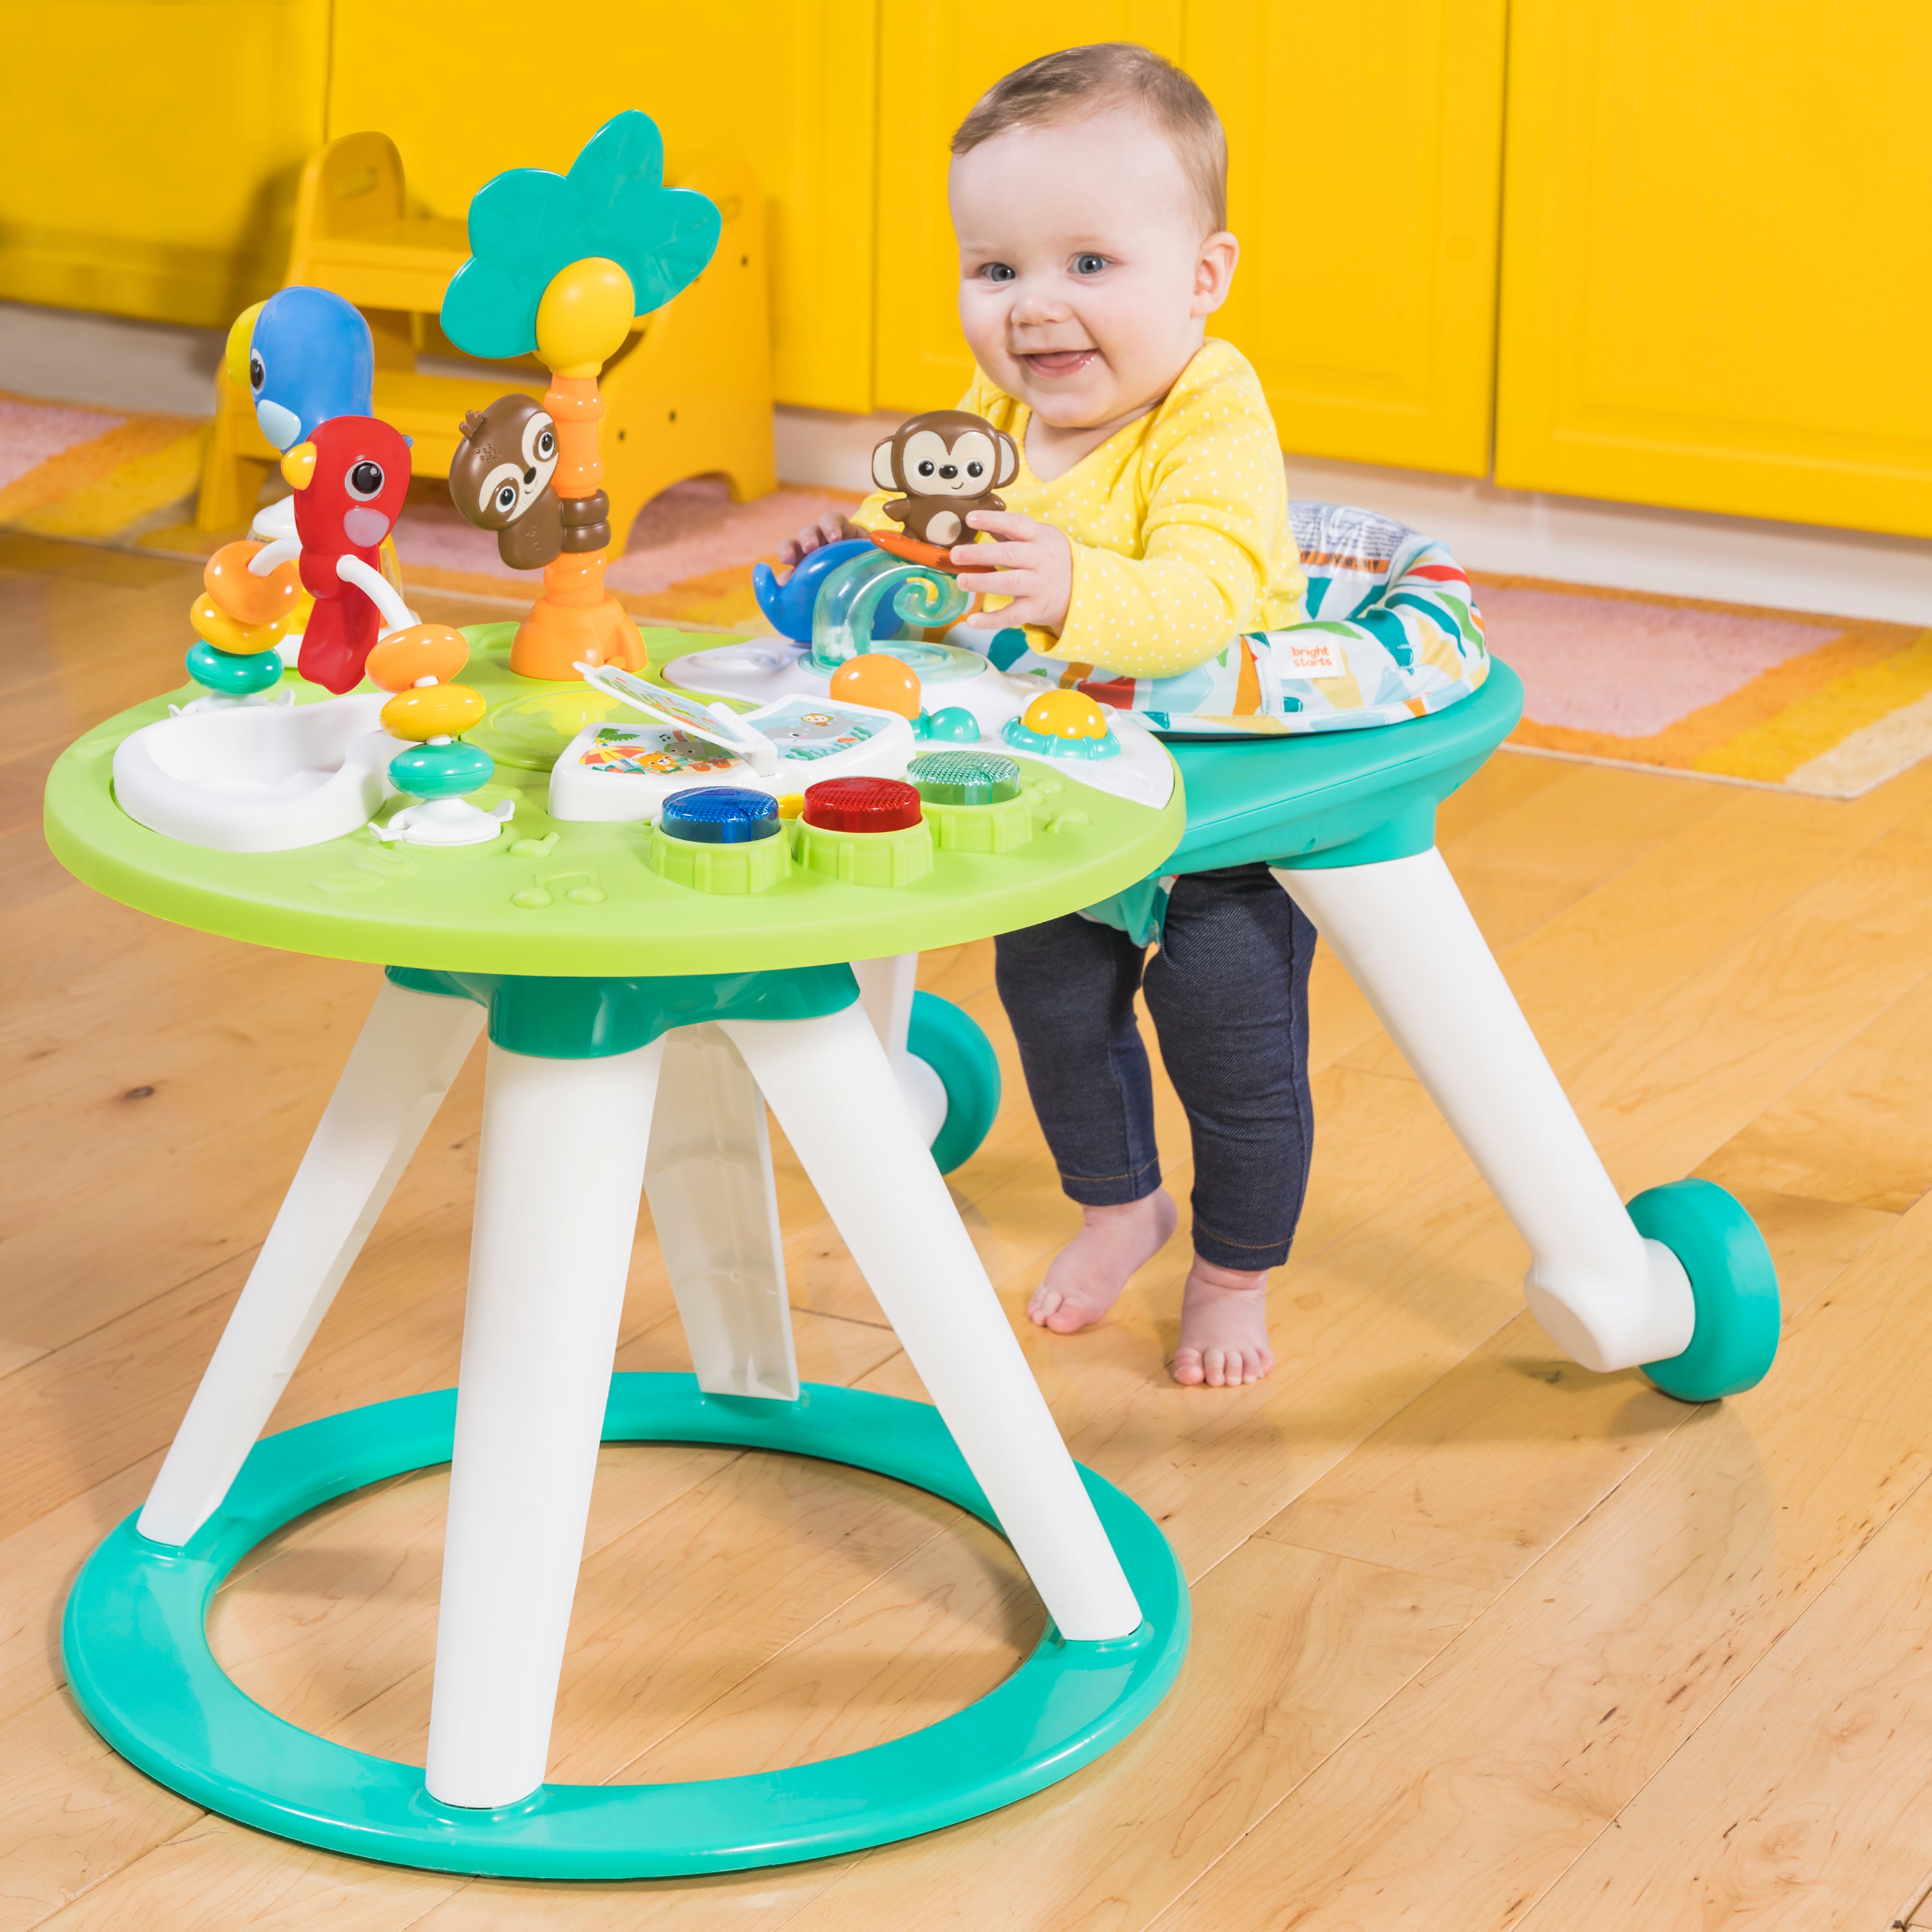 Little Balance Box 2-in-1 Baby Walker and Activity Table, Green